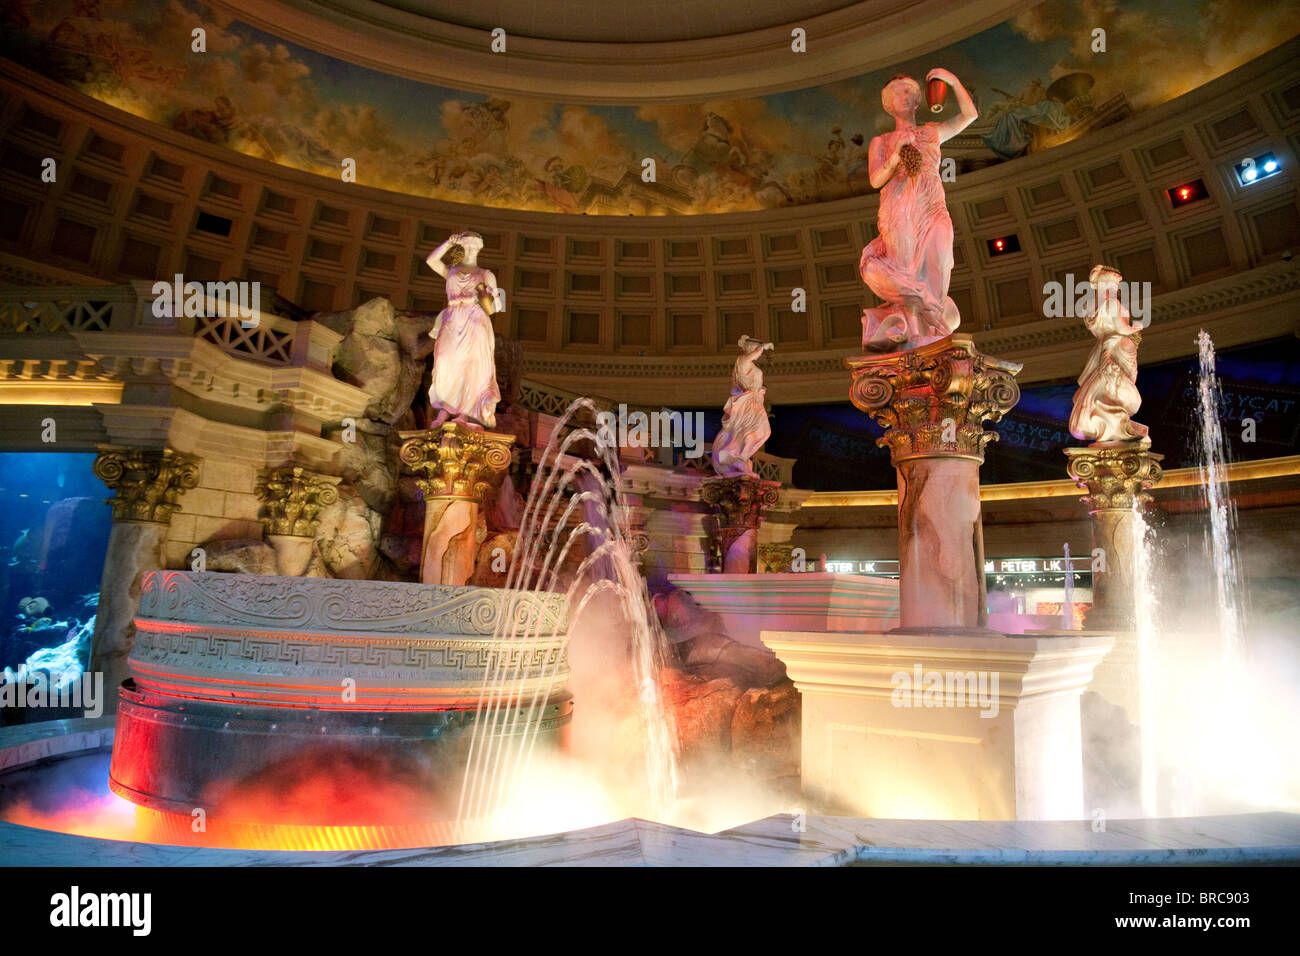 File:The Forum Shops at Caesars Palace (8276294113).jpg - Wikimedia Commons